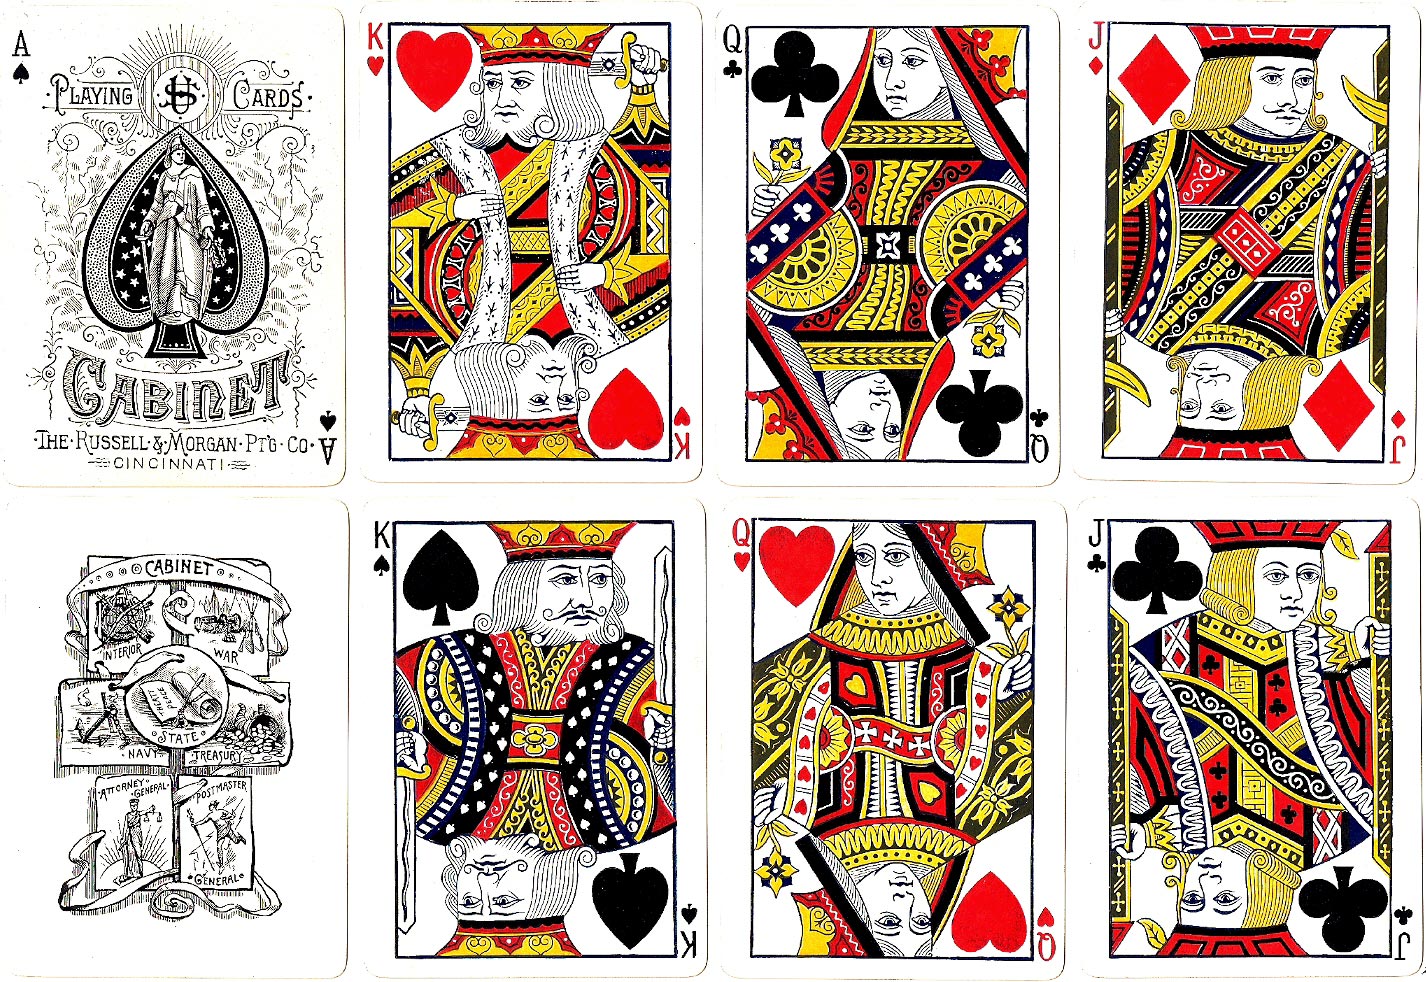 Cabinet No.707 playing cards manufactured by the Russell & Morgan Printing Co, Cincinnati, c.1888